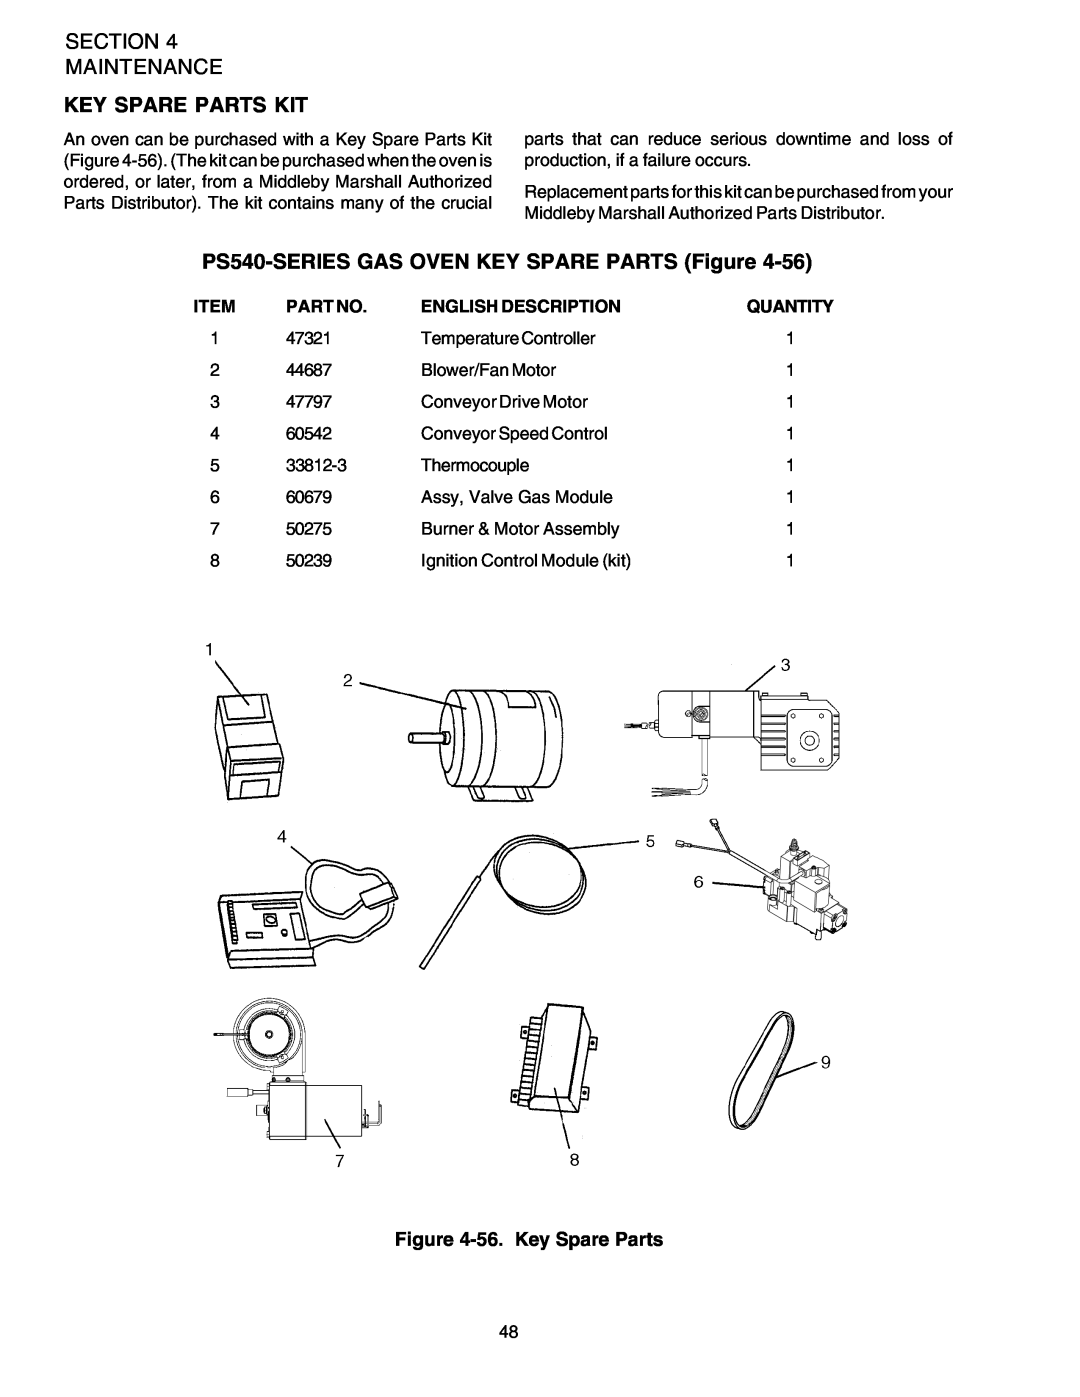 Middleby Marshall PS540G Section Maintenance, Key Spare Parts Kit, PS540-SERIES GAS OVEN KEY SPARE PARTS Figure, Quantity 